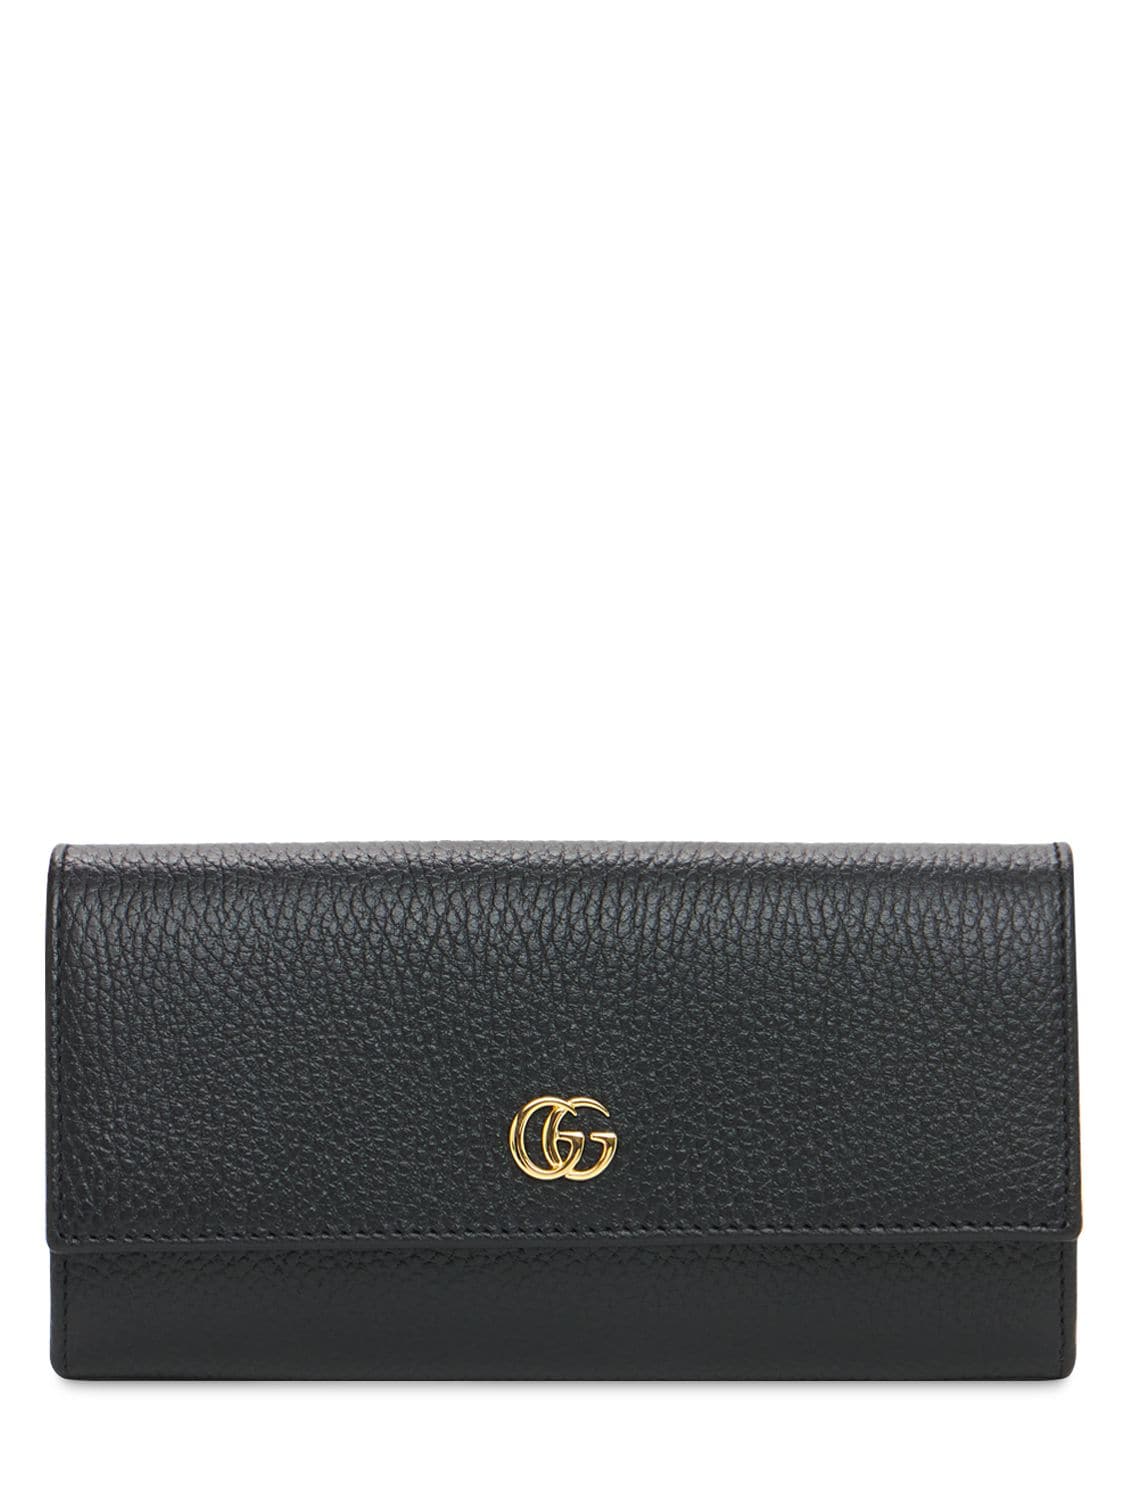 Image of Gg Marmont Leather Continental Wallet